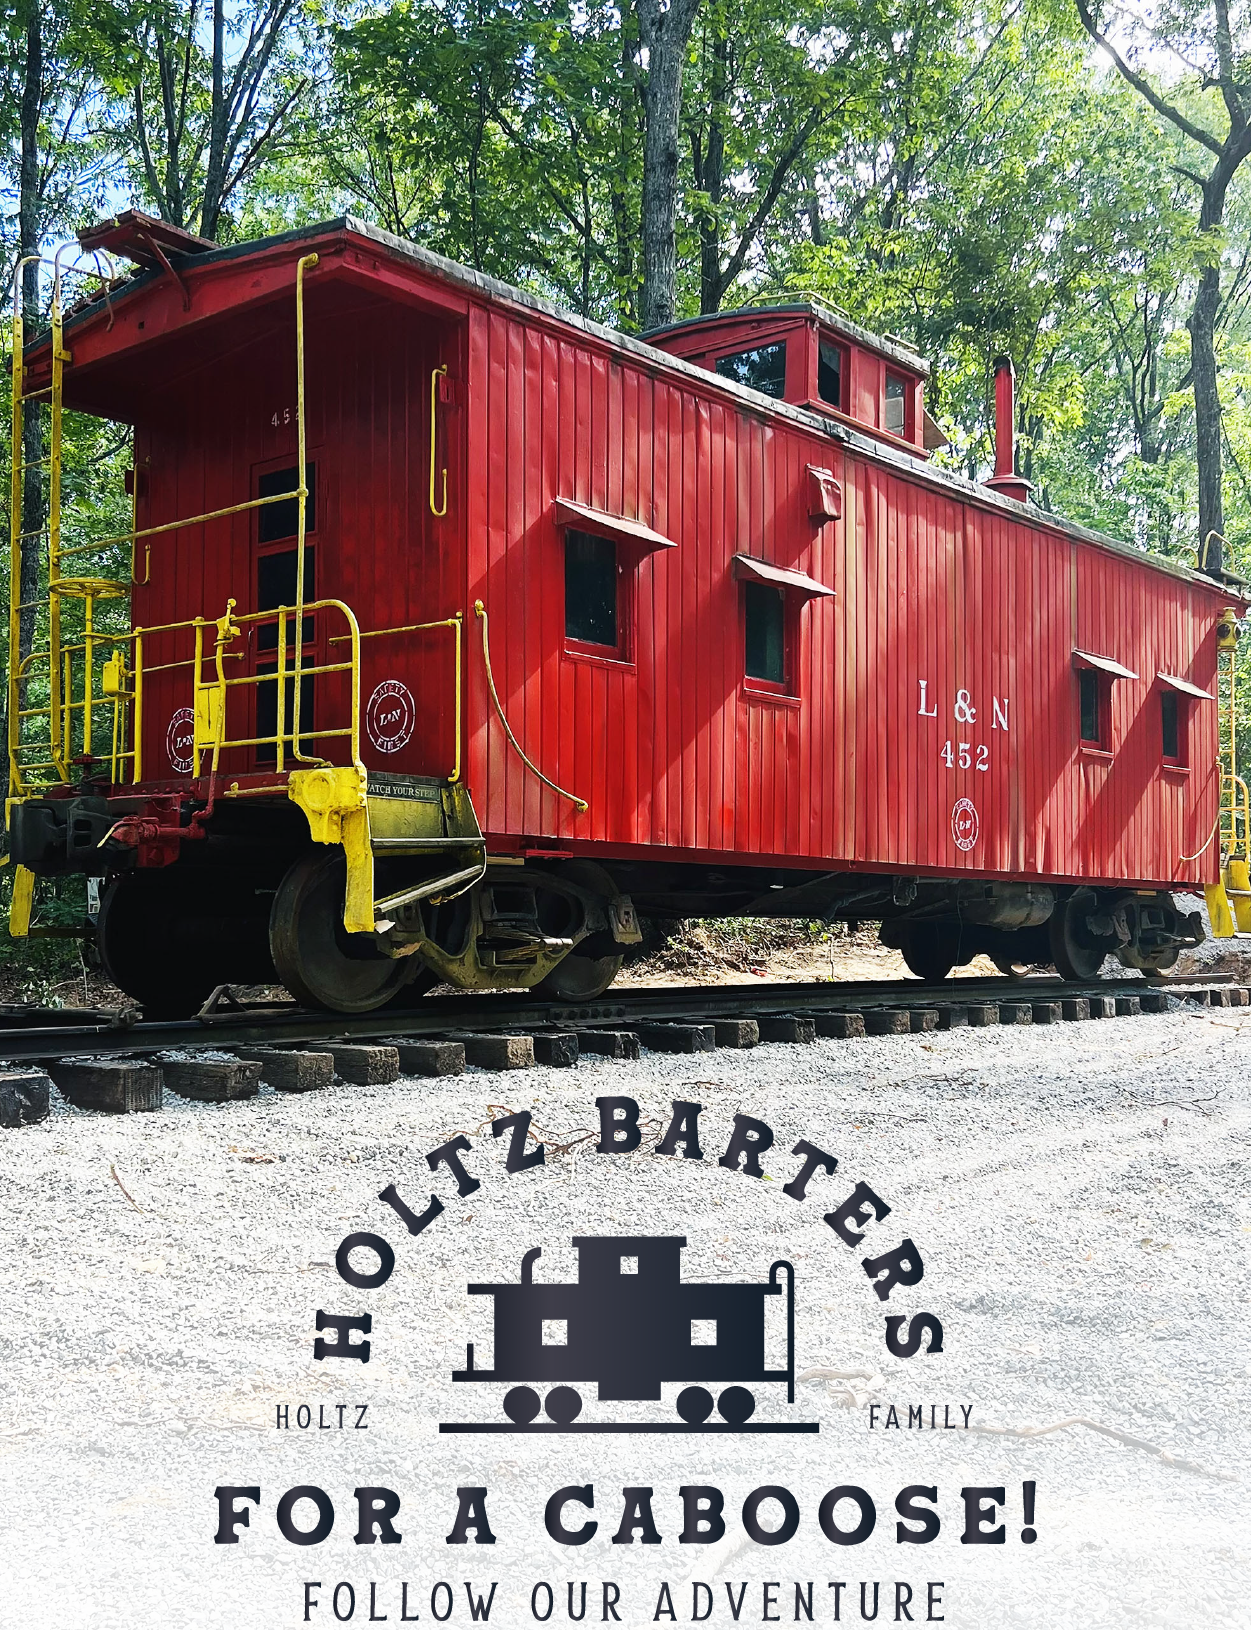 We Bartered for a Caboose! - Learning through Challenges